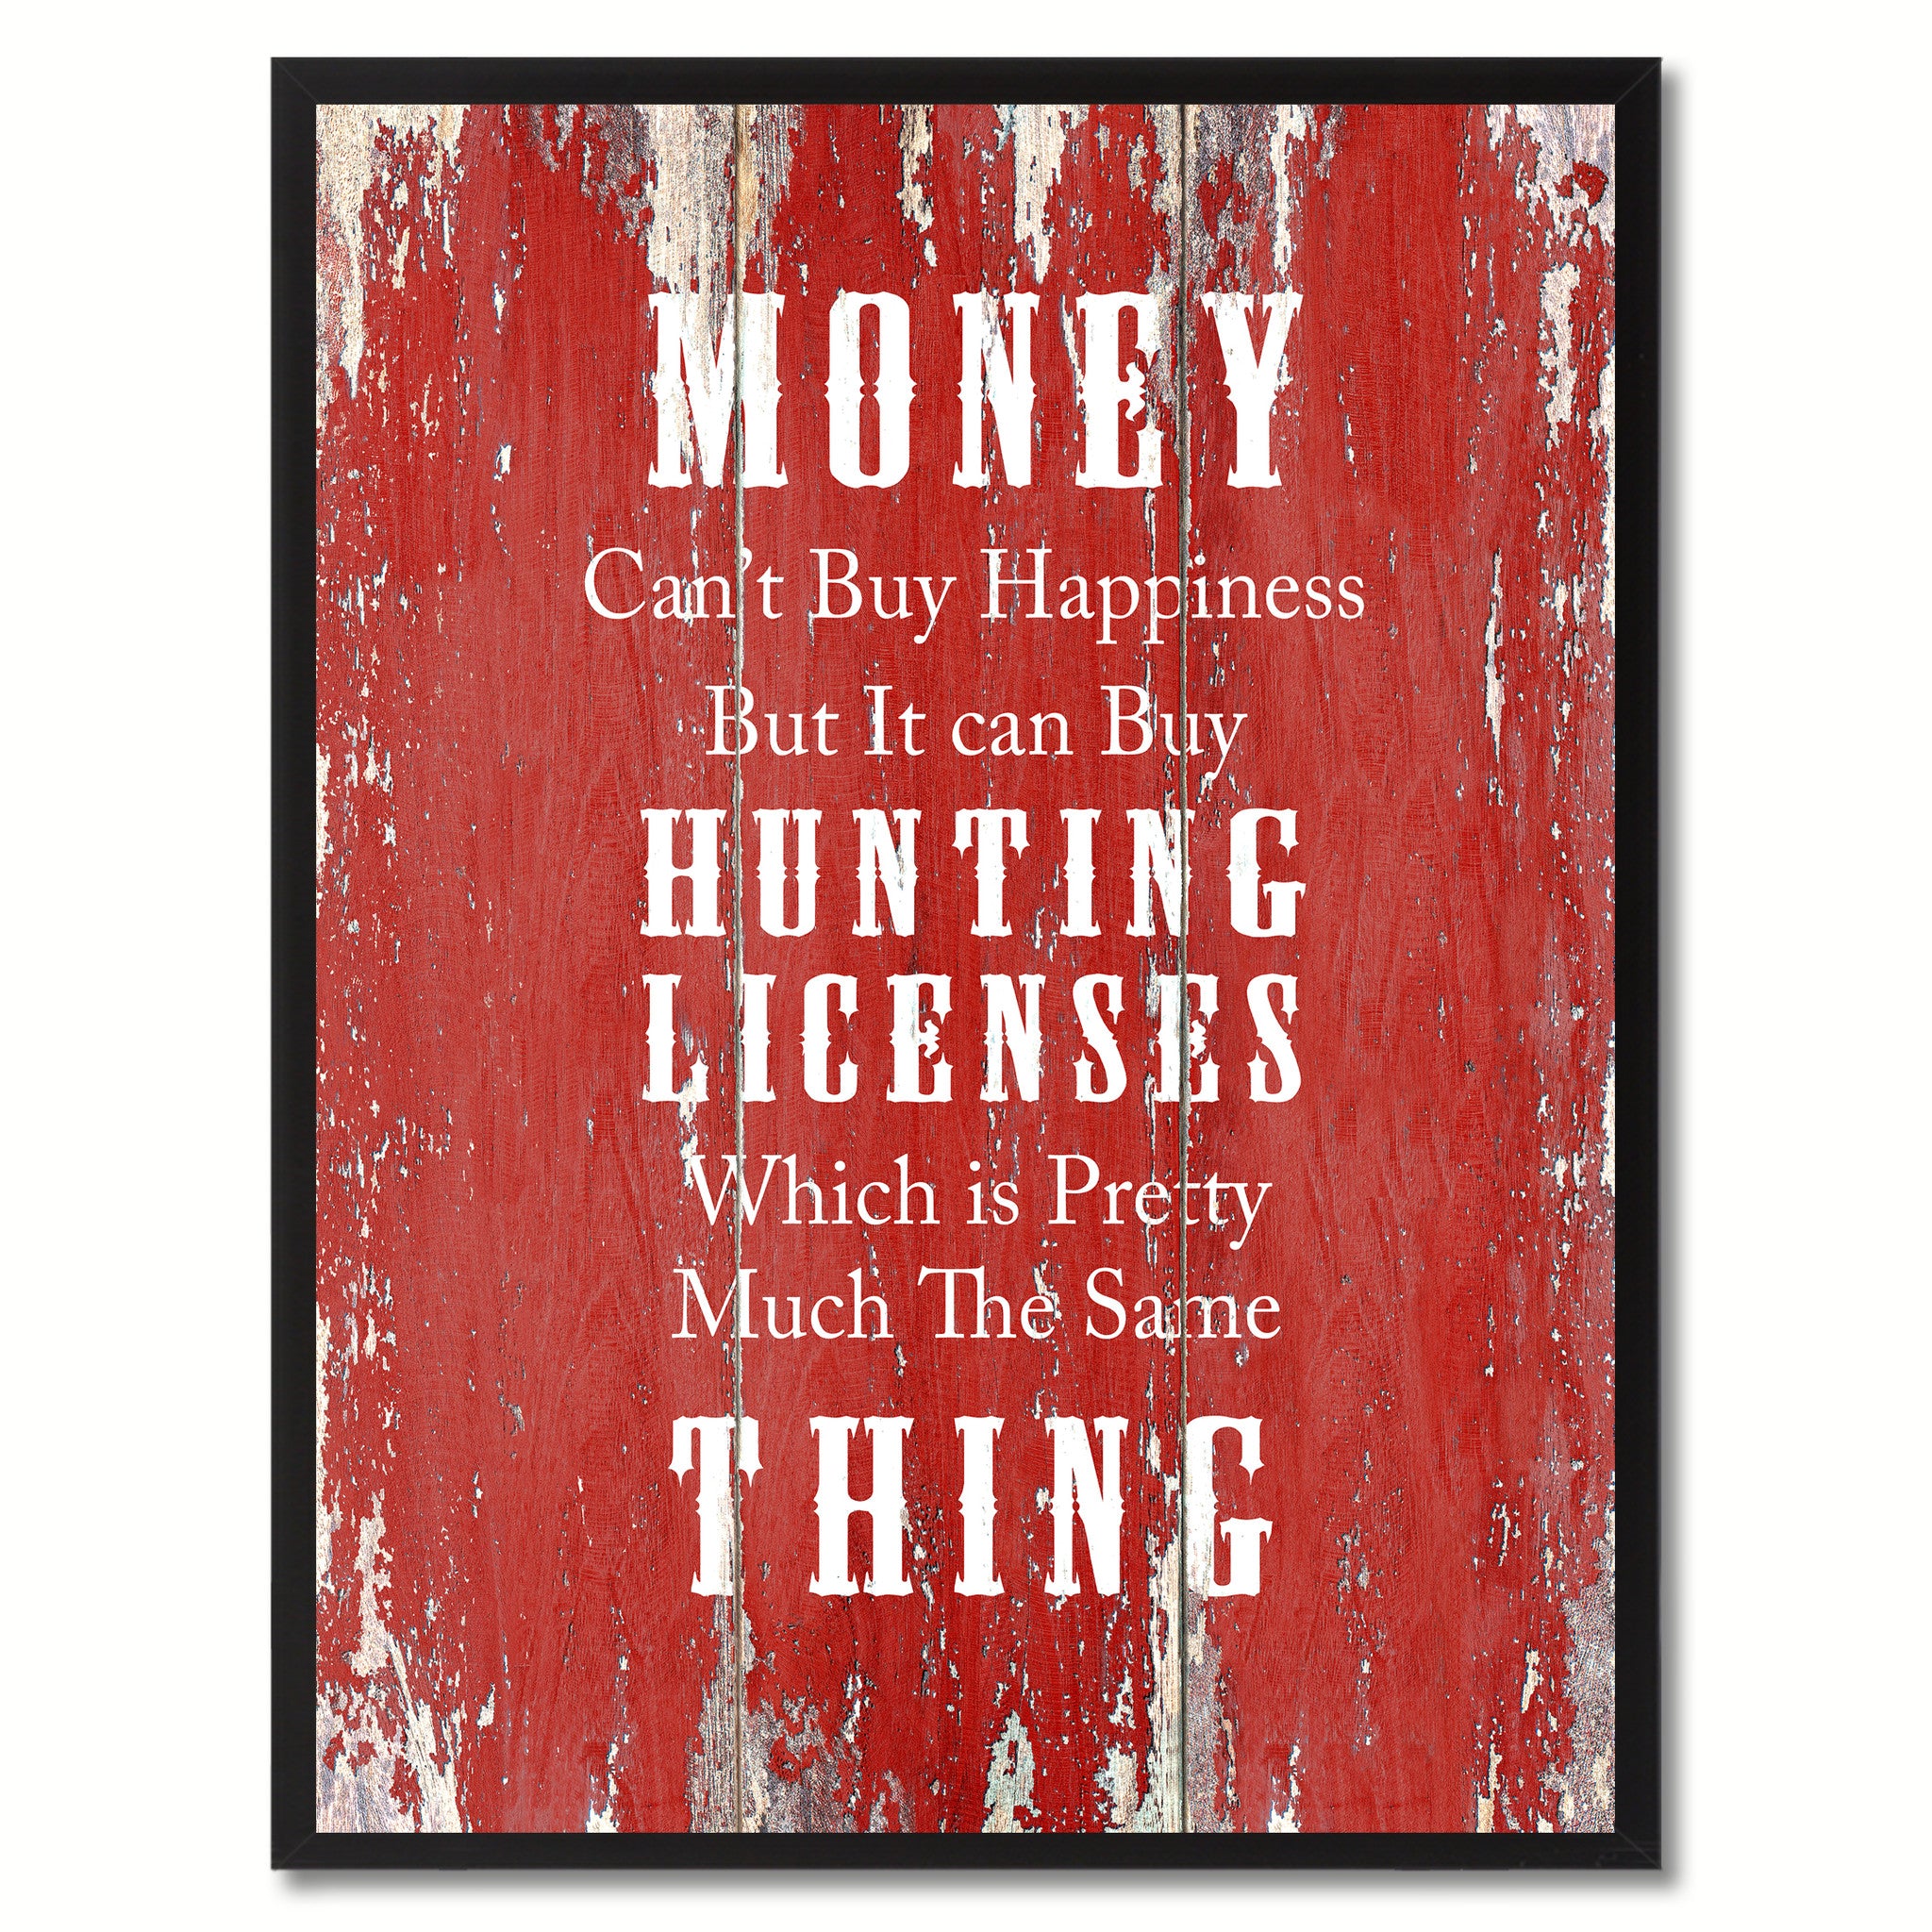 Money Can't Buy Happiness Saying Canvas Print, Black Picture Frame Home Decor Wall Art Gifts